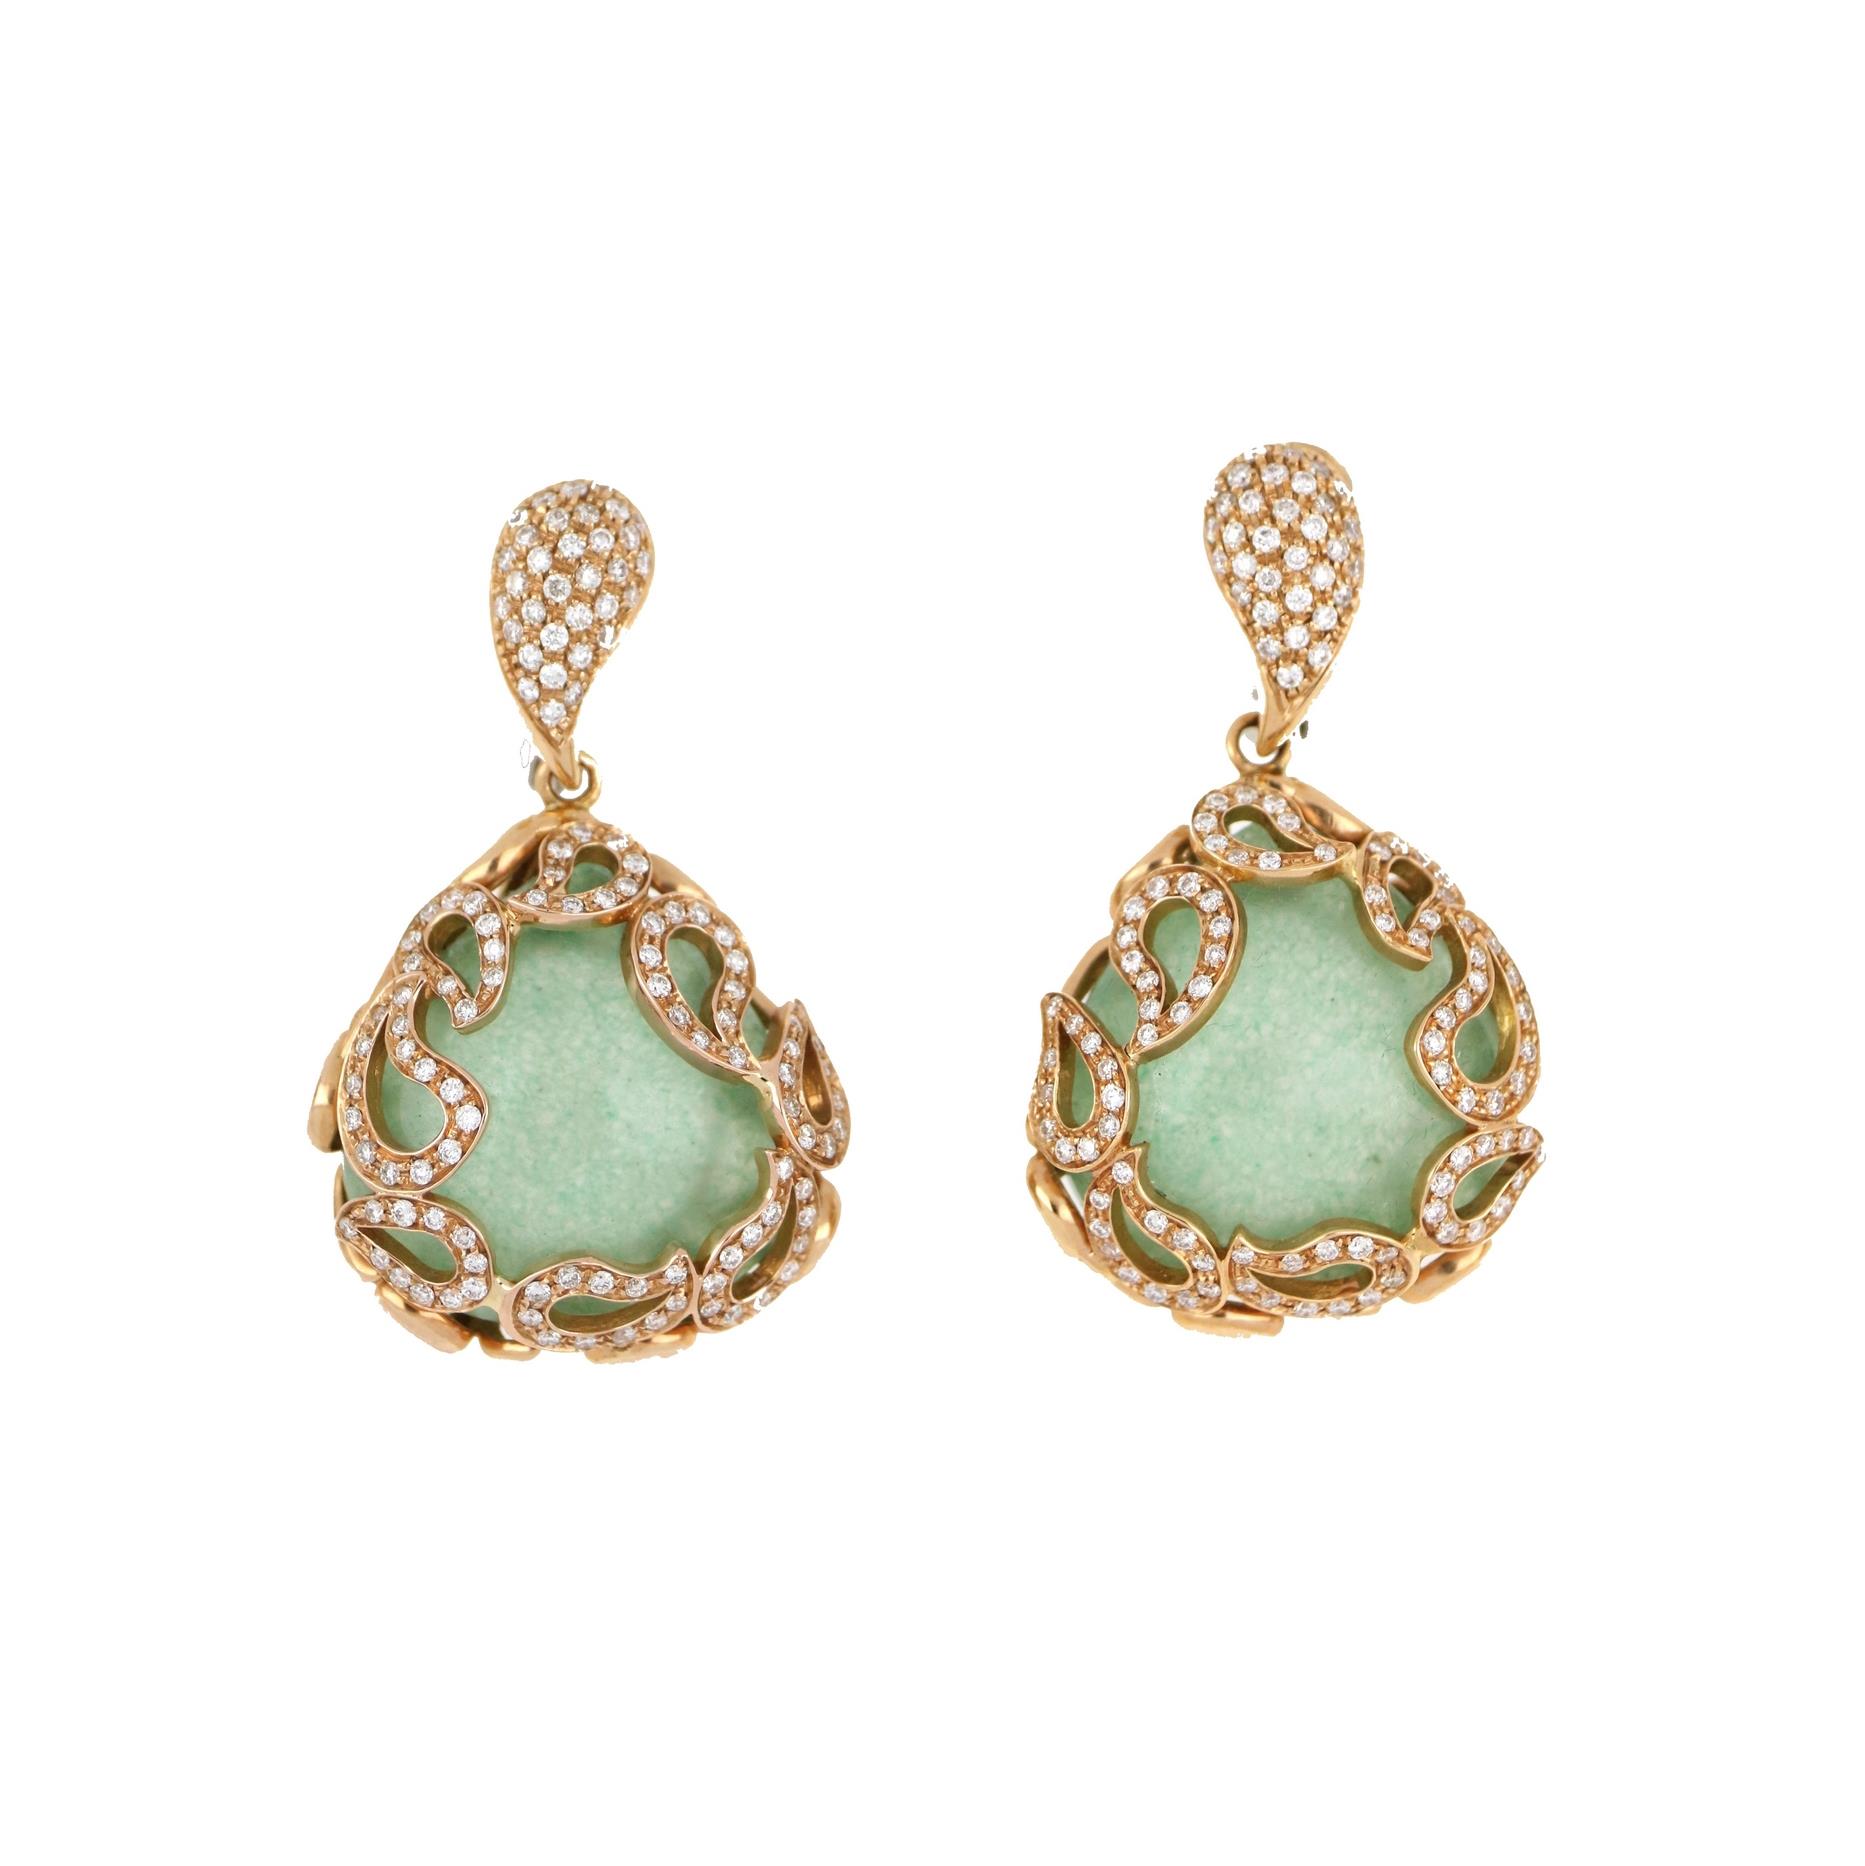 Gold pendant earrings with diamonds and green aventurine - GOLD ART